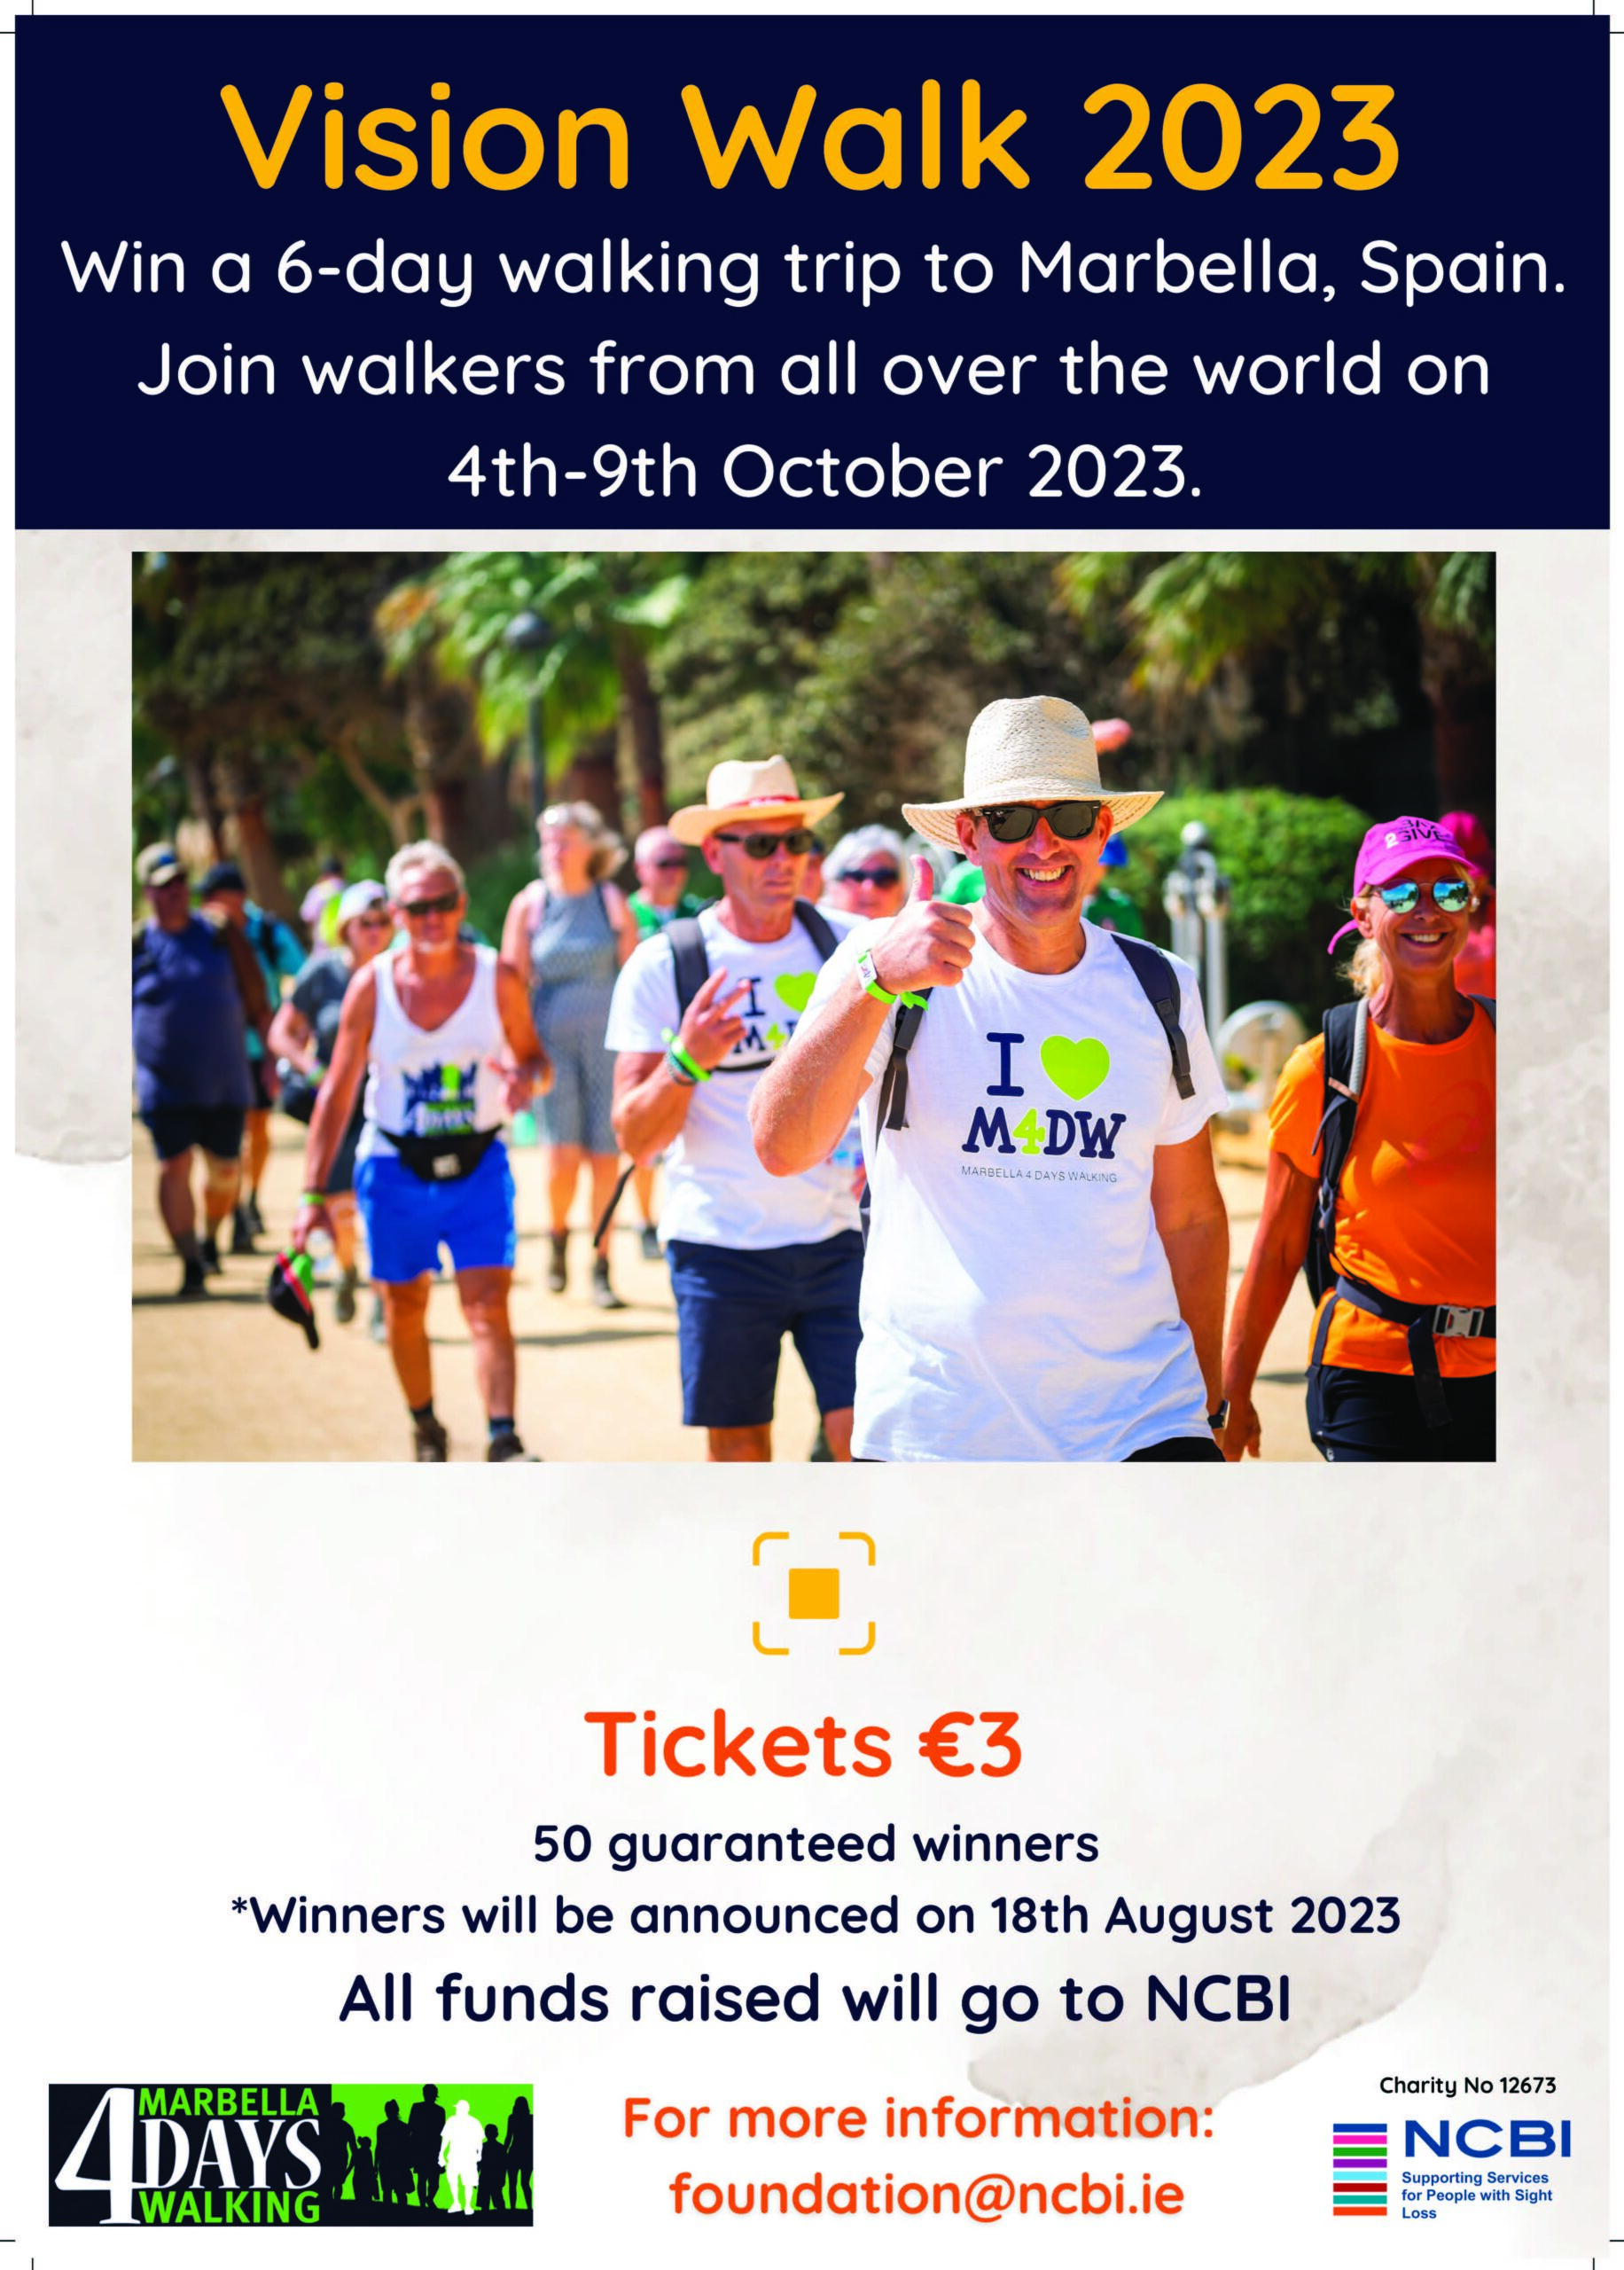 Vision Walk 2023 poster, which includes a picture of a group of walkers. There is also text on the poster which outlines how to get involved. You can either by a €3 ticket to be in with a chance of winning a place on the trip or you can fundraise €1,500 to automatically seal your place. The trip takes place from October 4th to 9th.